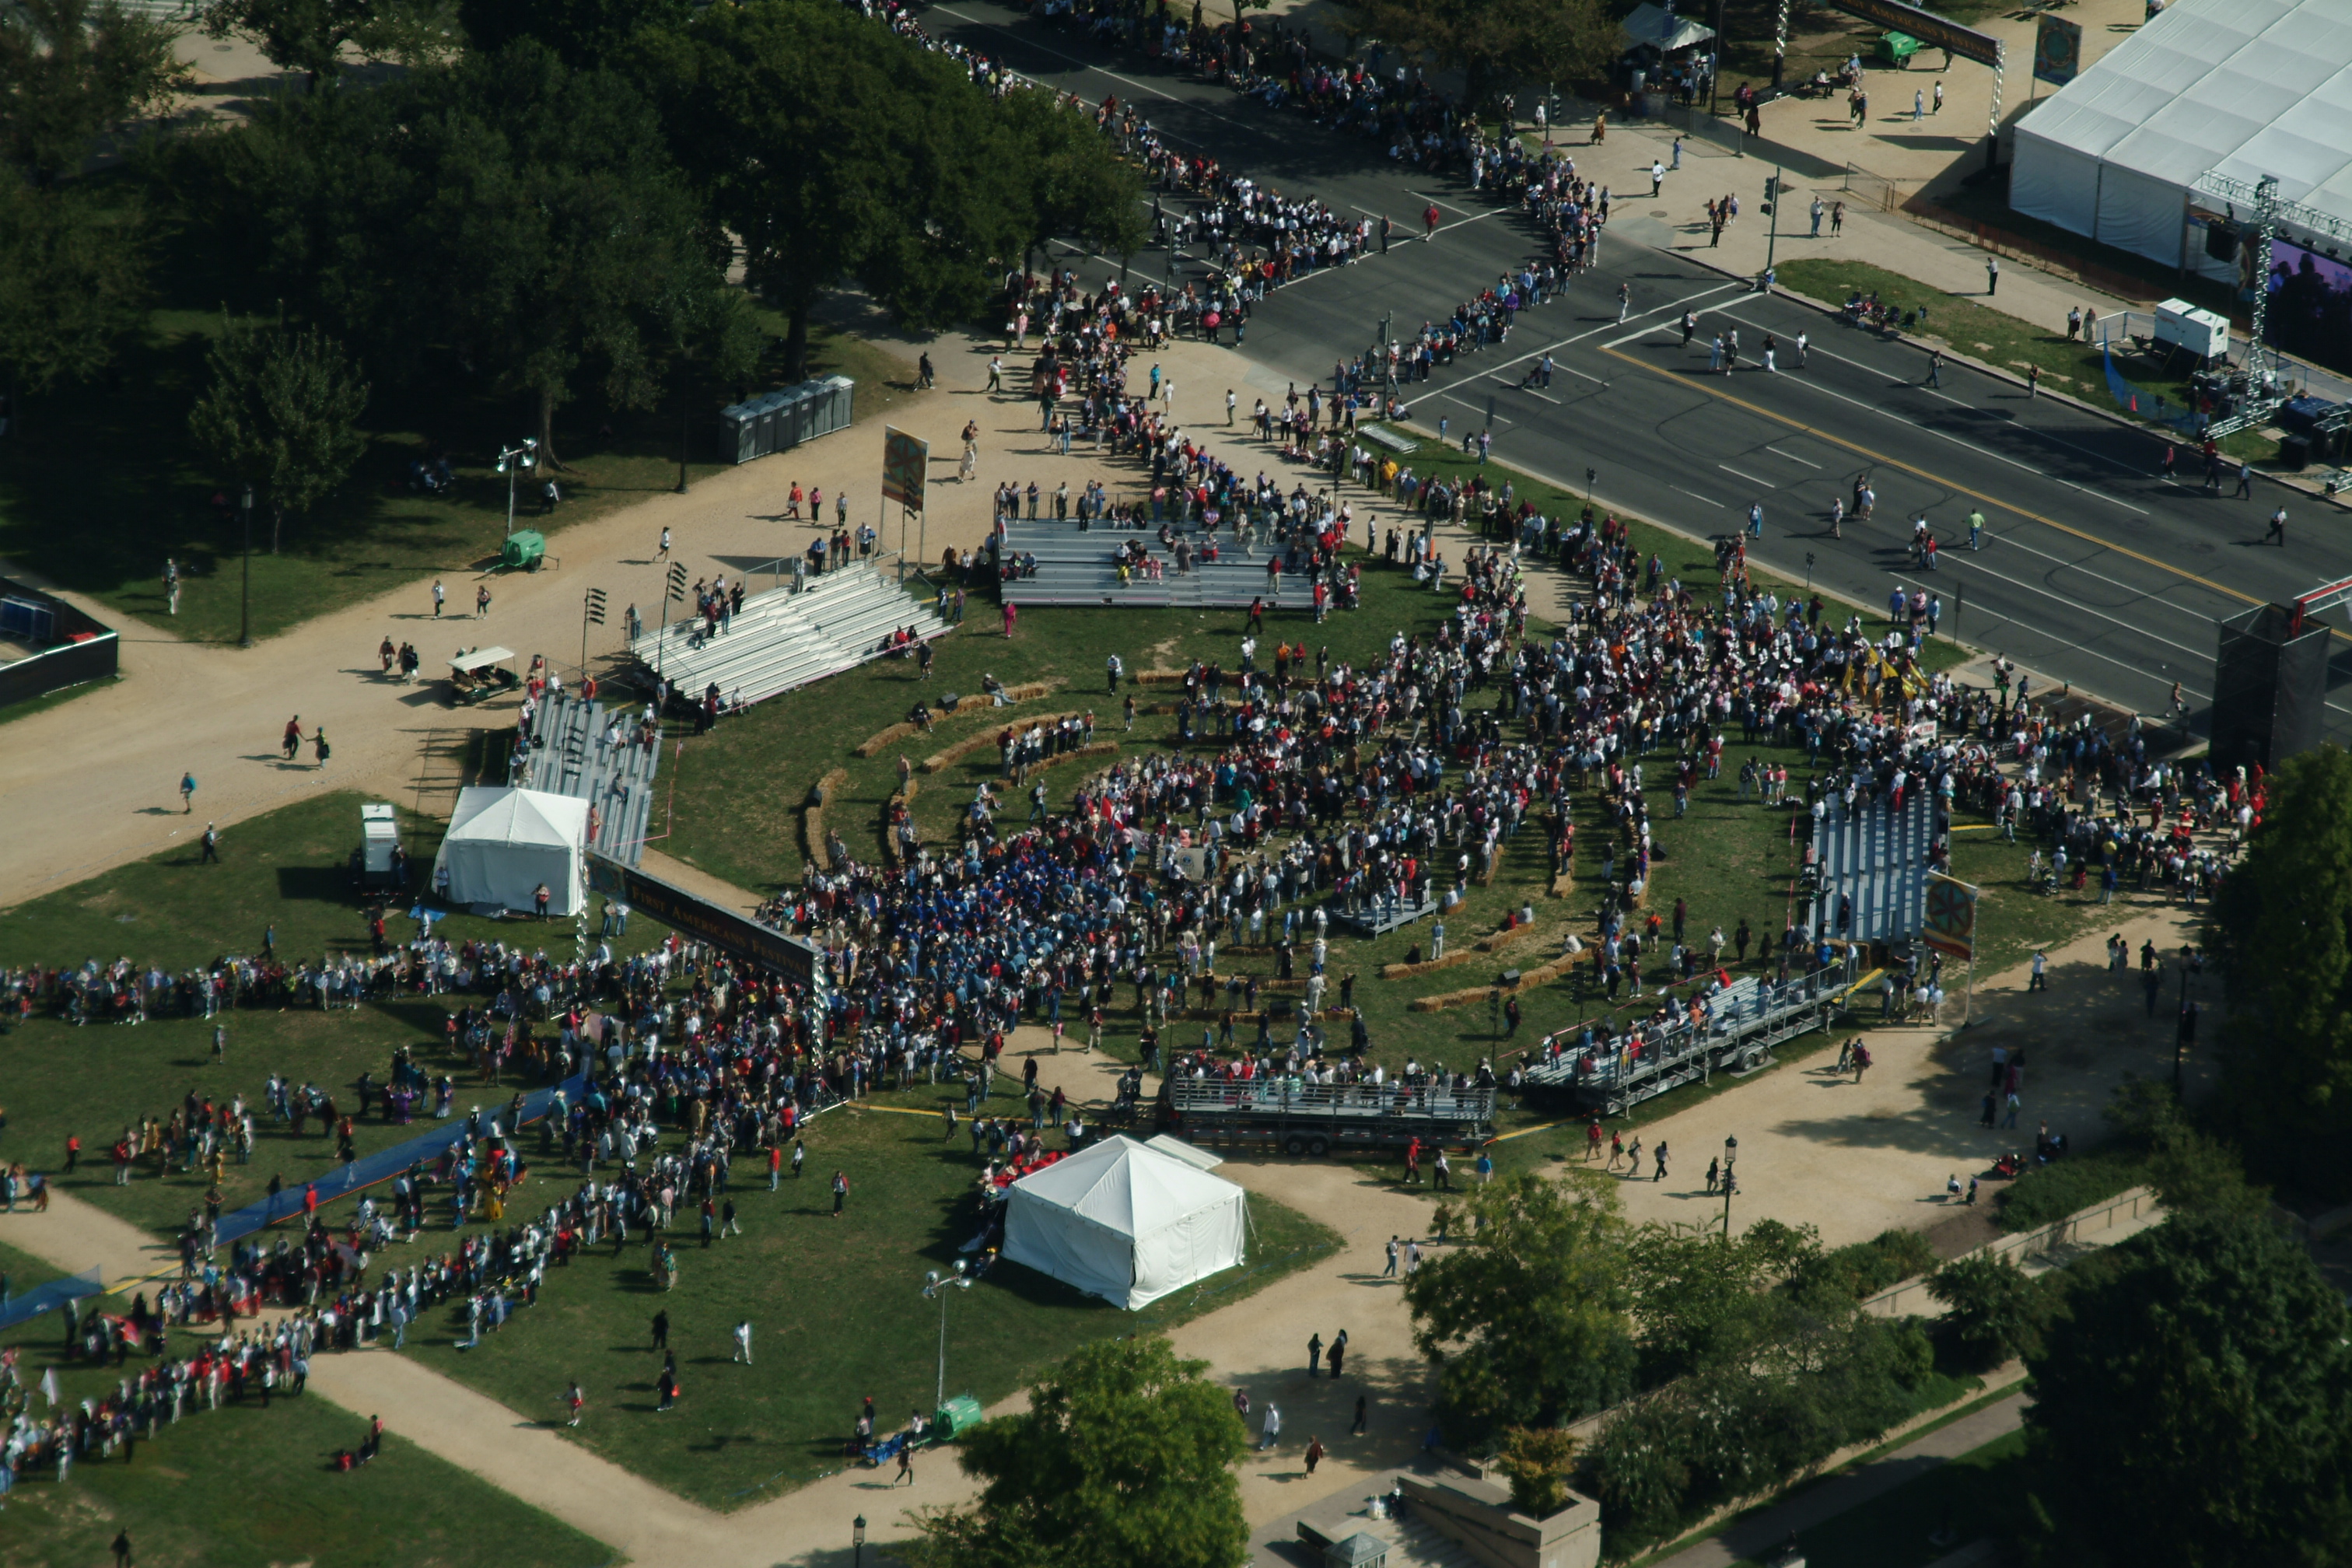 Aerial view of a crowd of people walking in lines on the National Mall.